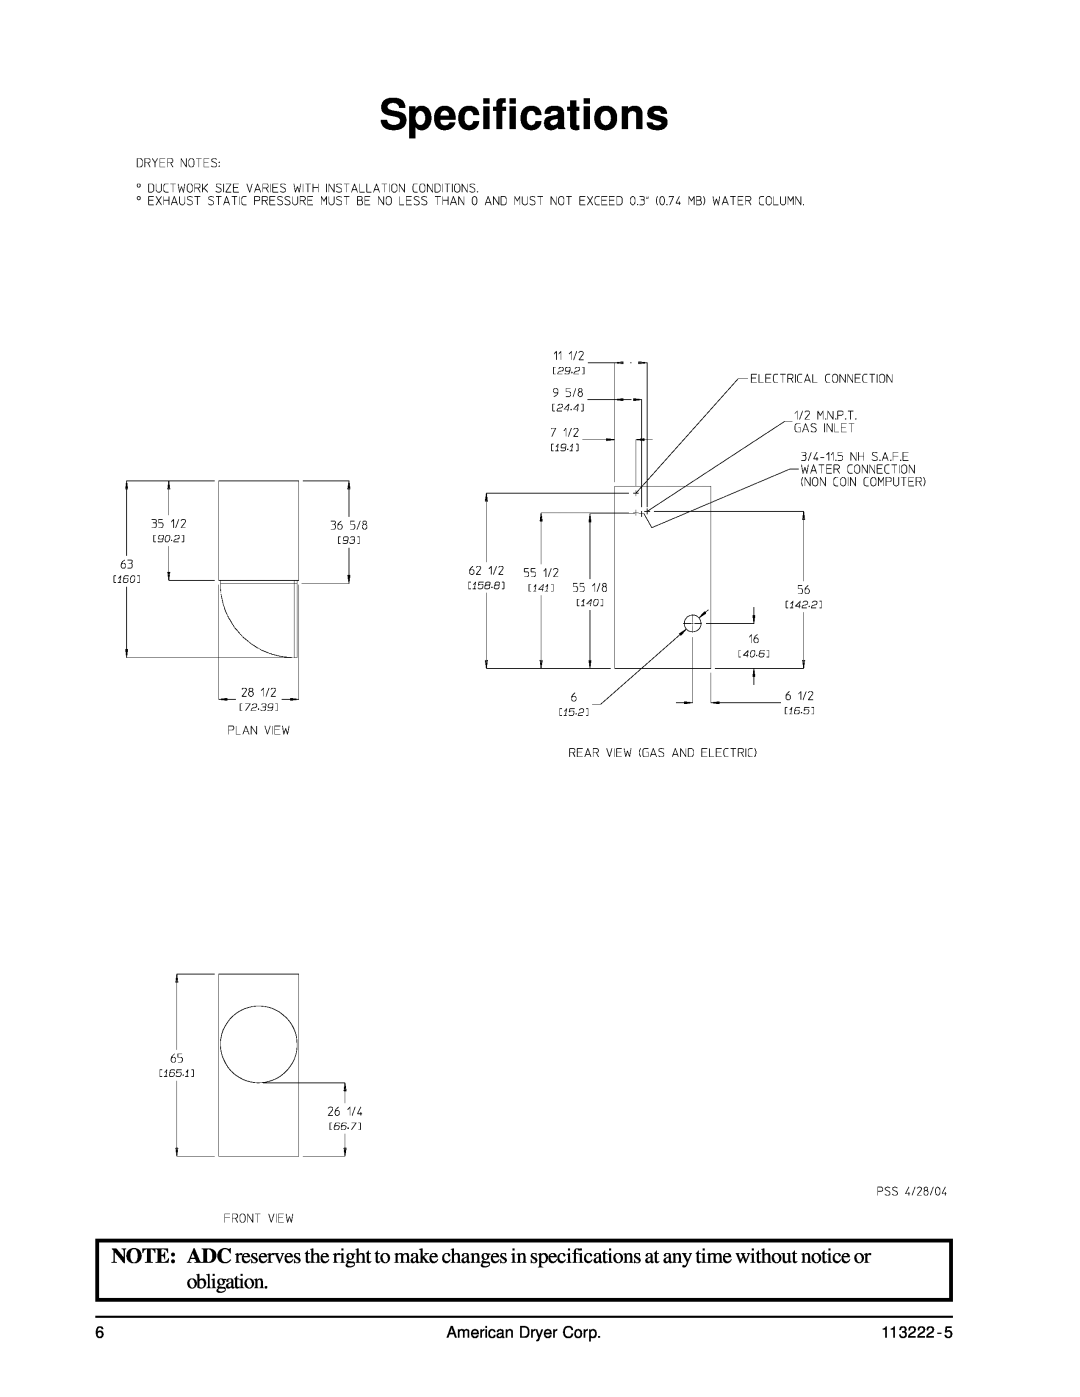 American Dryer Corp AD-24 Phase 7 installation manual Specifications, American Dryer Corp, 113222 